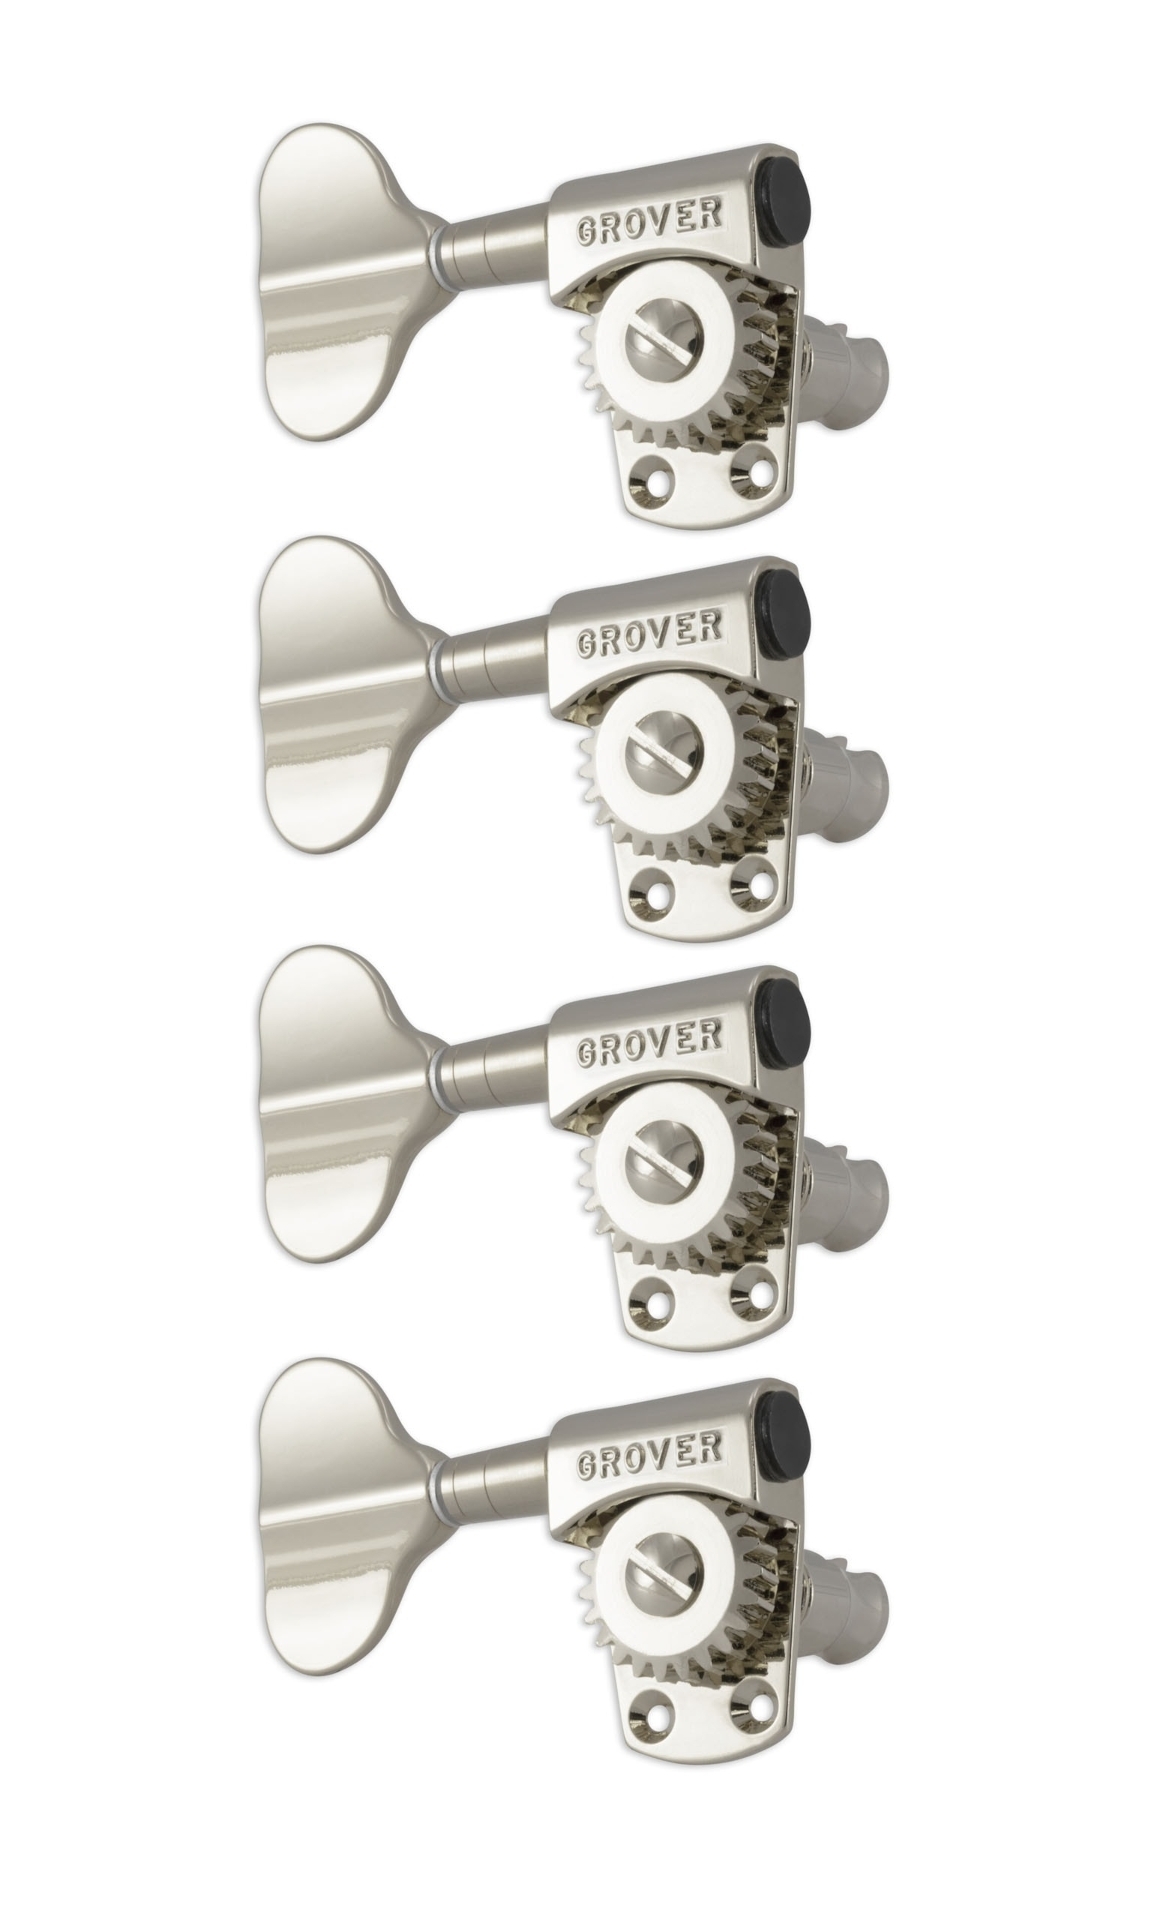 Grover 145NL4 Titan Electric Bass Machines - Bass Machine Heads, 4-in-Line, Lefthand, Treble Side (Right) - Nickel